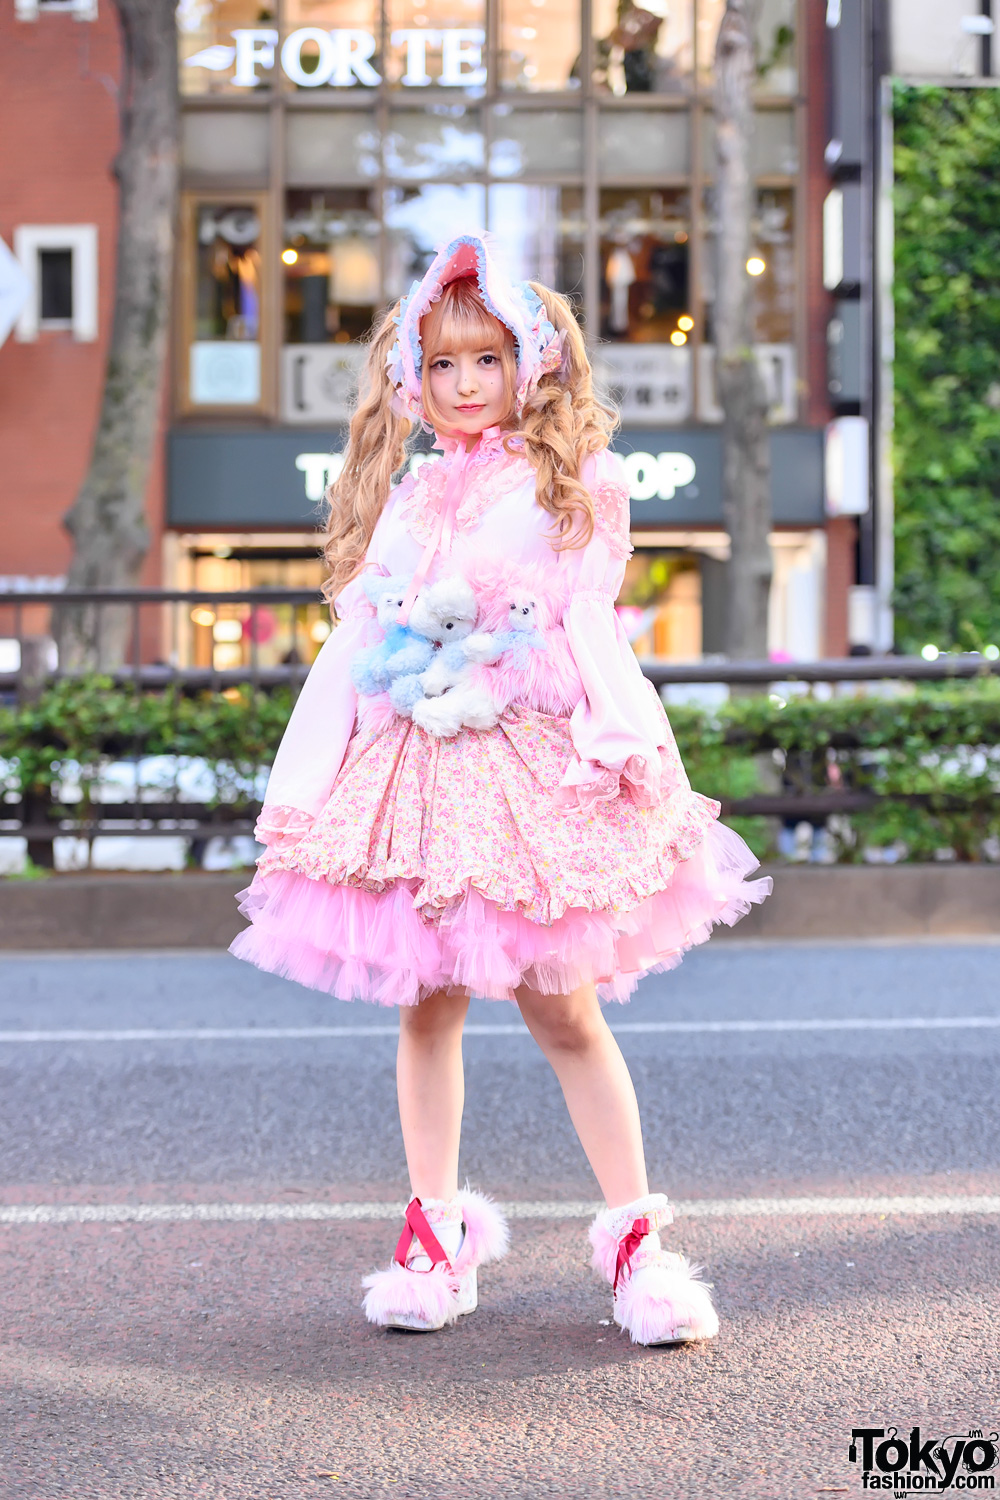 Japanese Cosplayer in Lolita Style w/ Teddy Bears Corset, Pink Tulle Dress & Furry Platform Shoes